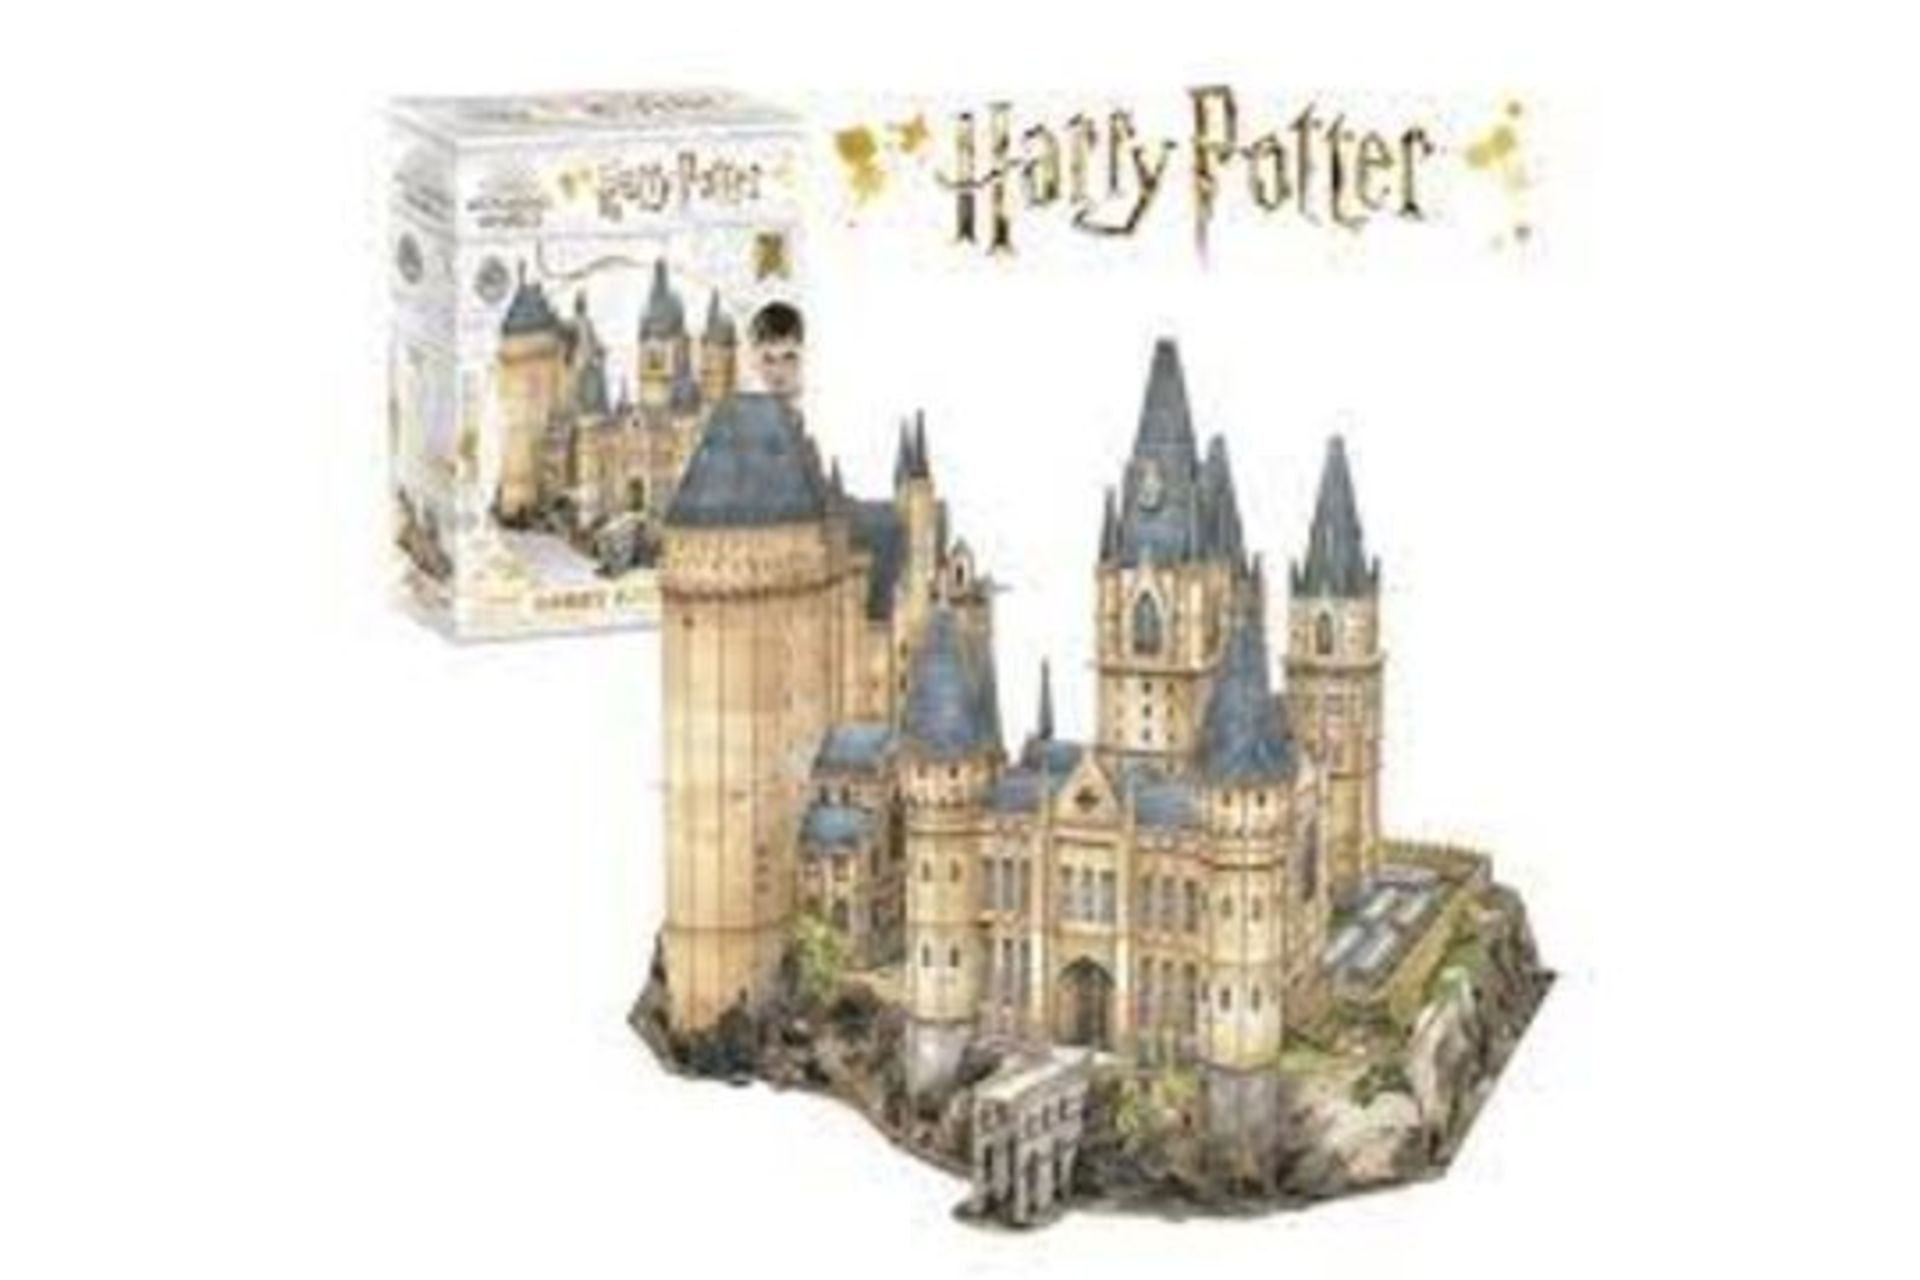 4 X BRAND NEW HARRY POTTER WIZARDING WORLD HOGWARTS ASTRONOMY TOWER 3D PUZZLES RRP £70 EACH R19 - Image 2 of 2